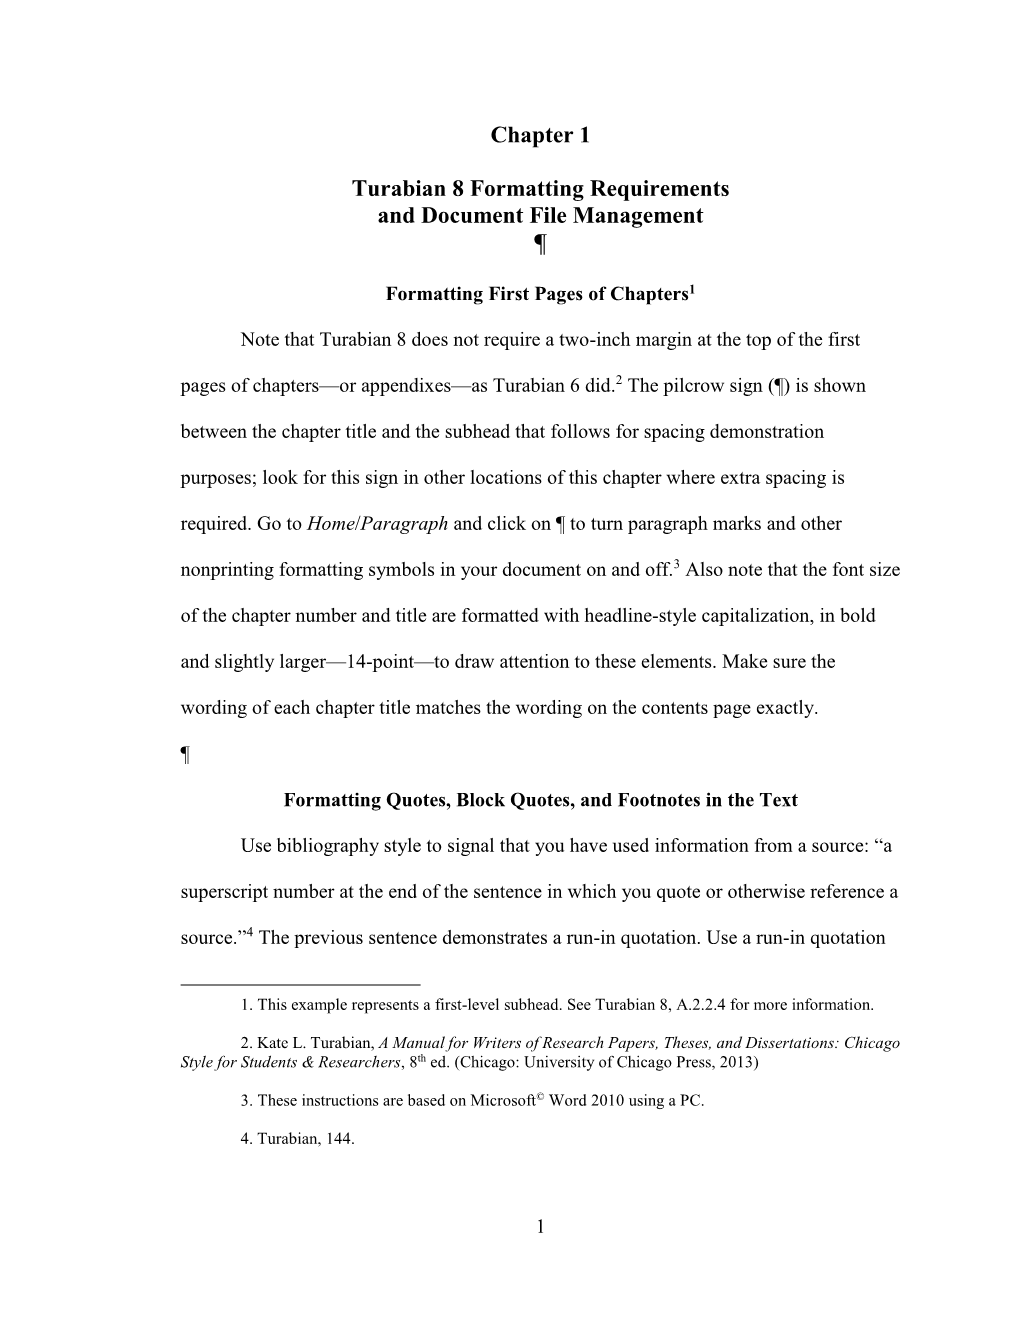 Chapter 1 Turabian 8 Formatting Requirements and Document File